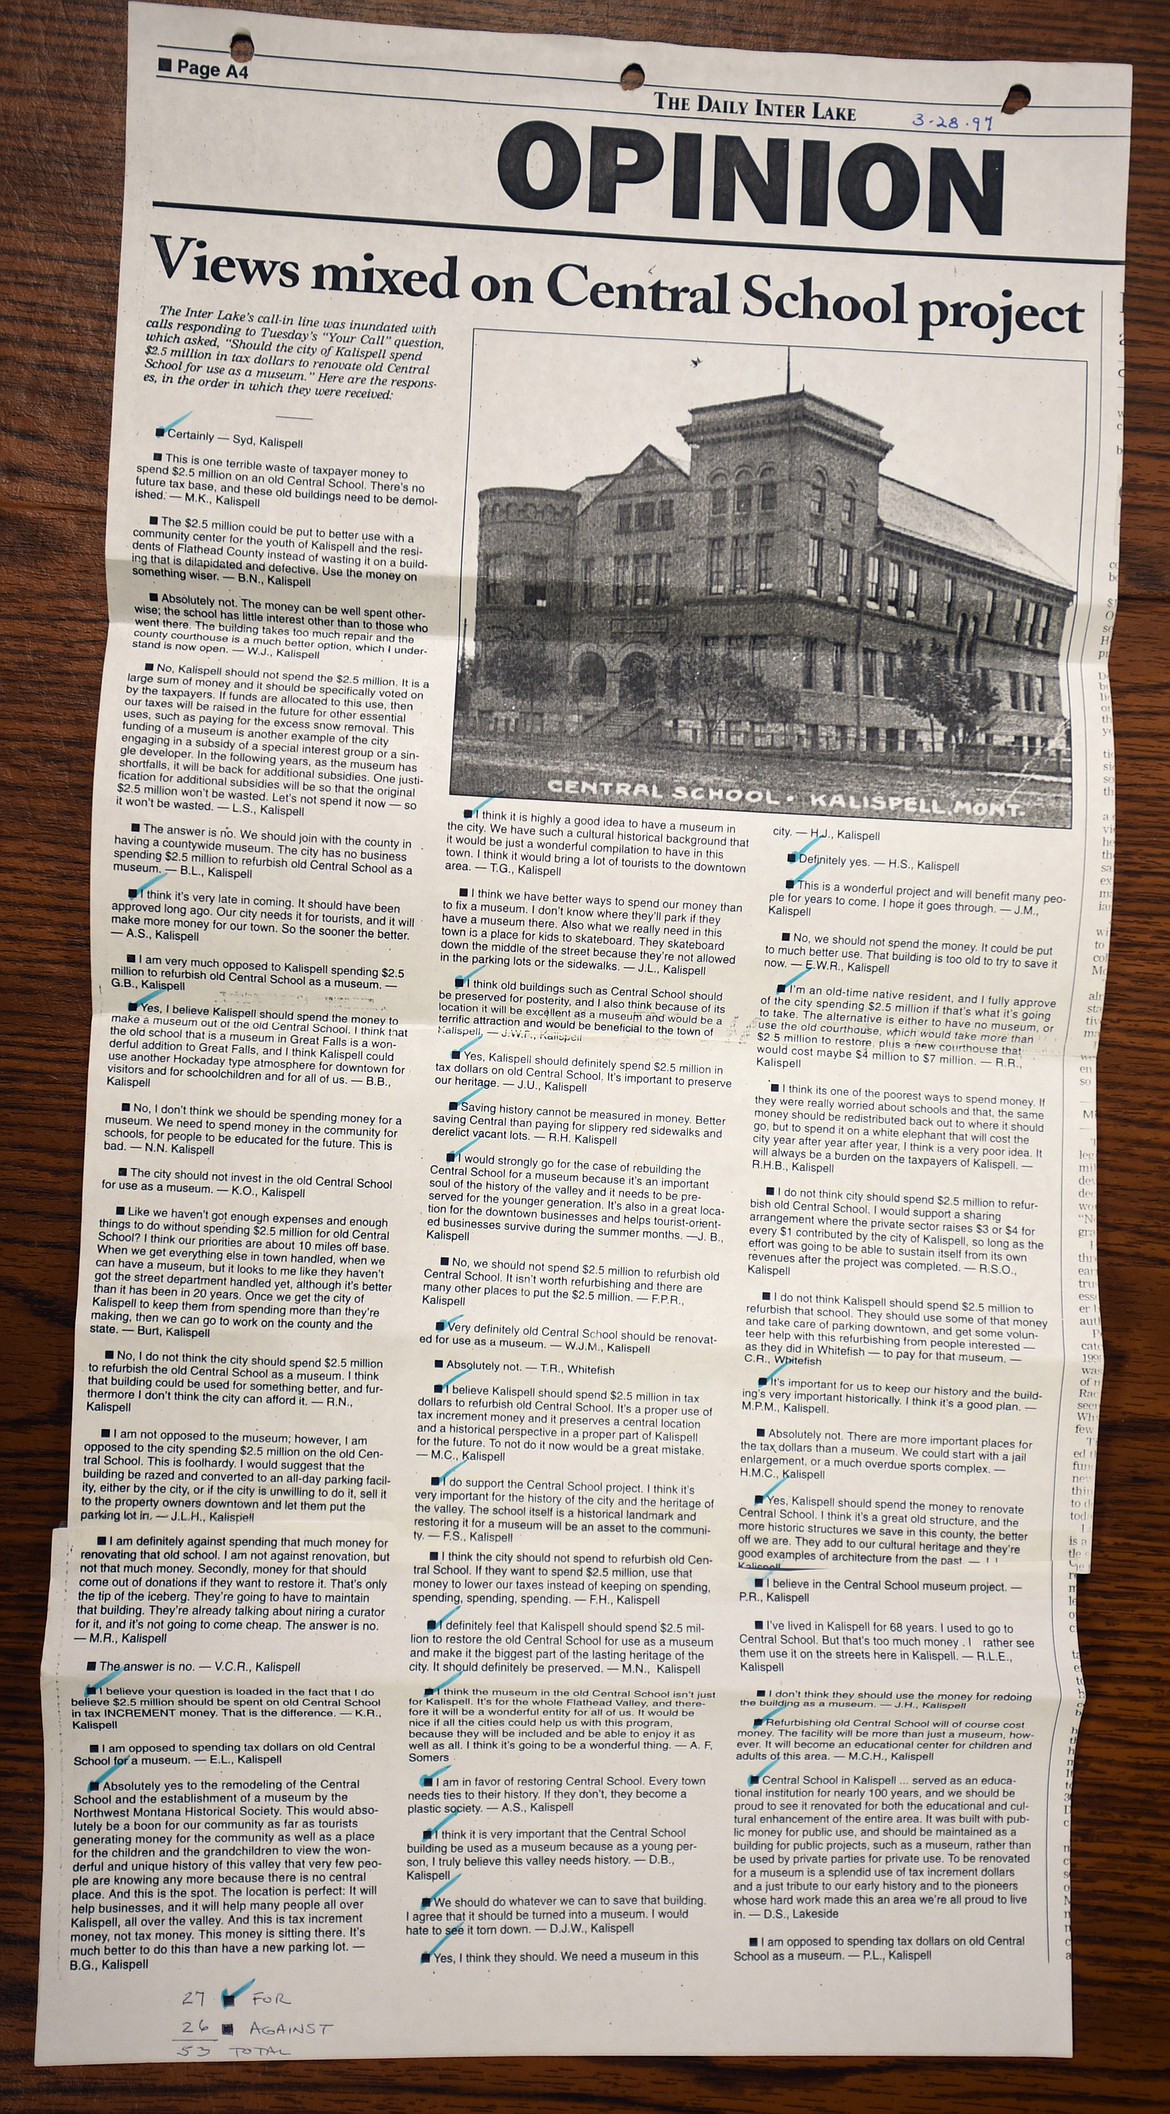 A three-ring binder contains all of the articles and opinions that were stirred up in March of 1997 as Kalispell debated the decision to save the historic Central School or not. In that binder is this copy of an opinion page from the Daily Inter Lake that ran on March 28, 1997. The museum staff counted the opinions for and against and came out to 27 for (marked with a blue check) and 26 against, showing how evenly divided the residents were on this issue.(Brenda Ahearn/Daily Inter Lake)